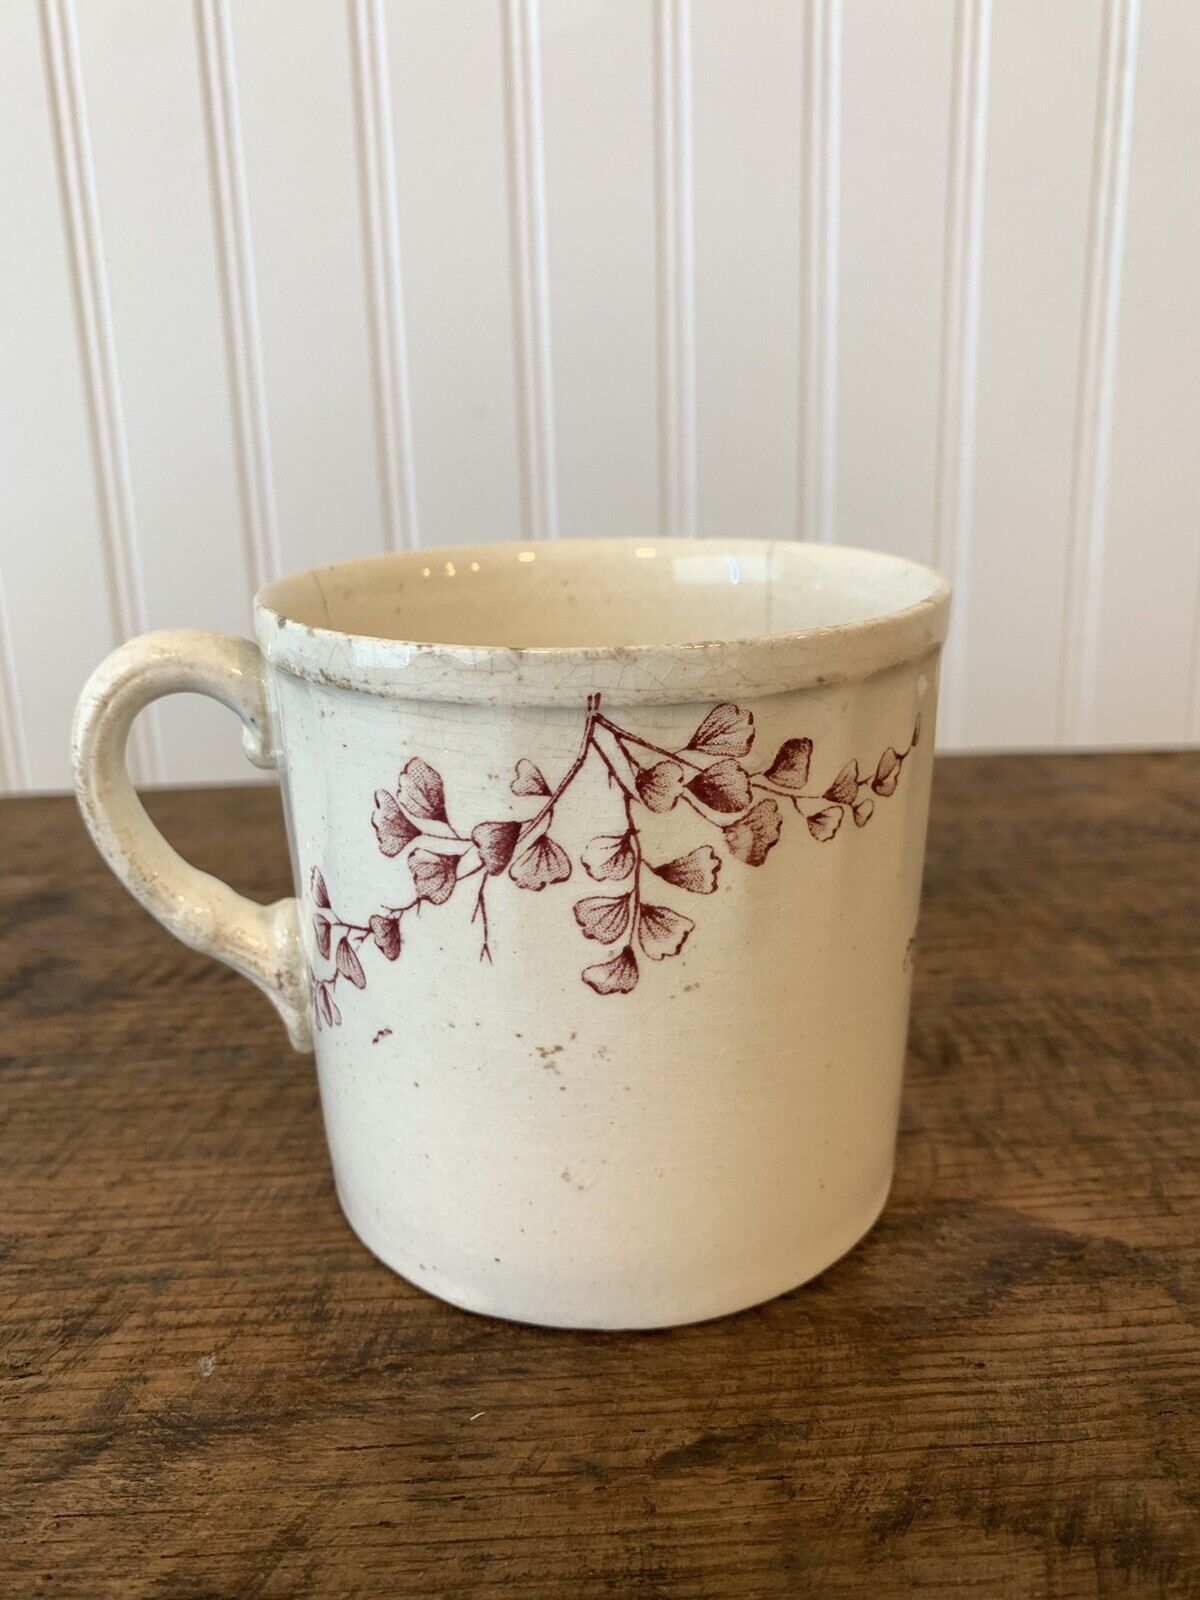 Antique Pink Transferware Mug Chippy & Tea Stained